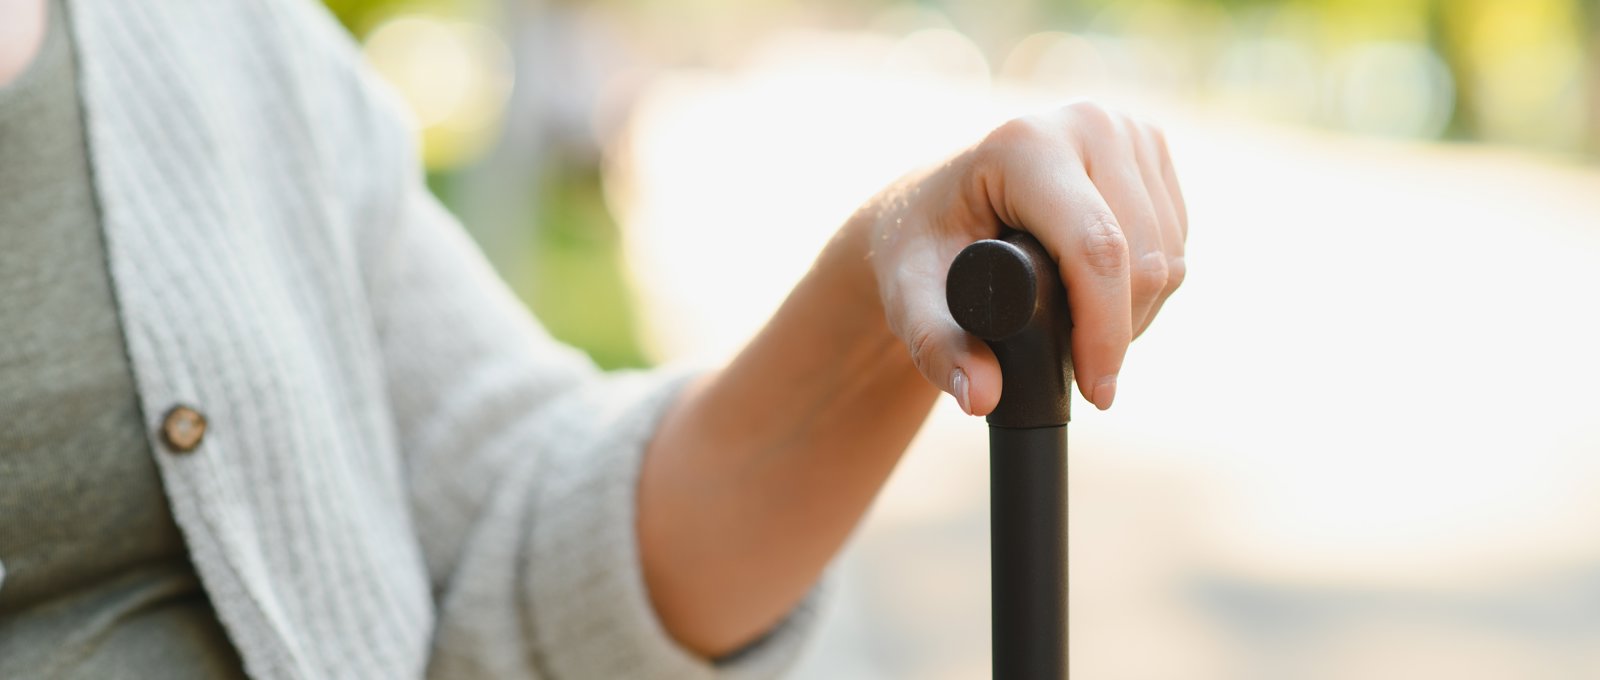 Close up photo of an elderly woman's hand resting on the handle of her walking stick